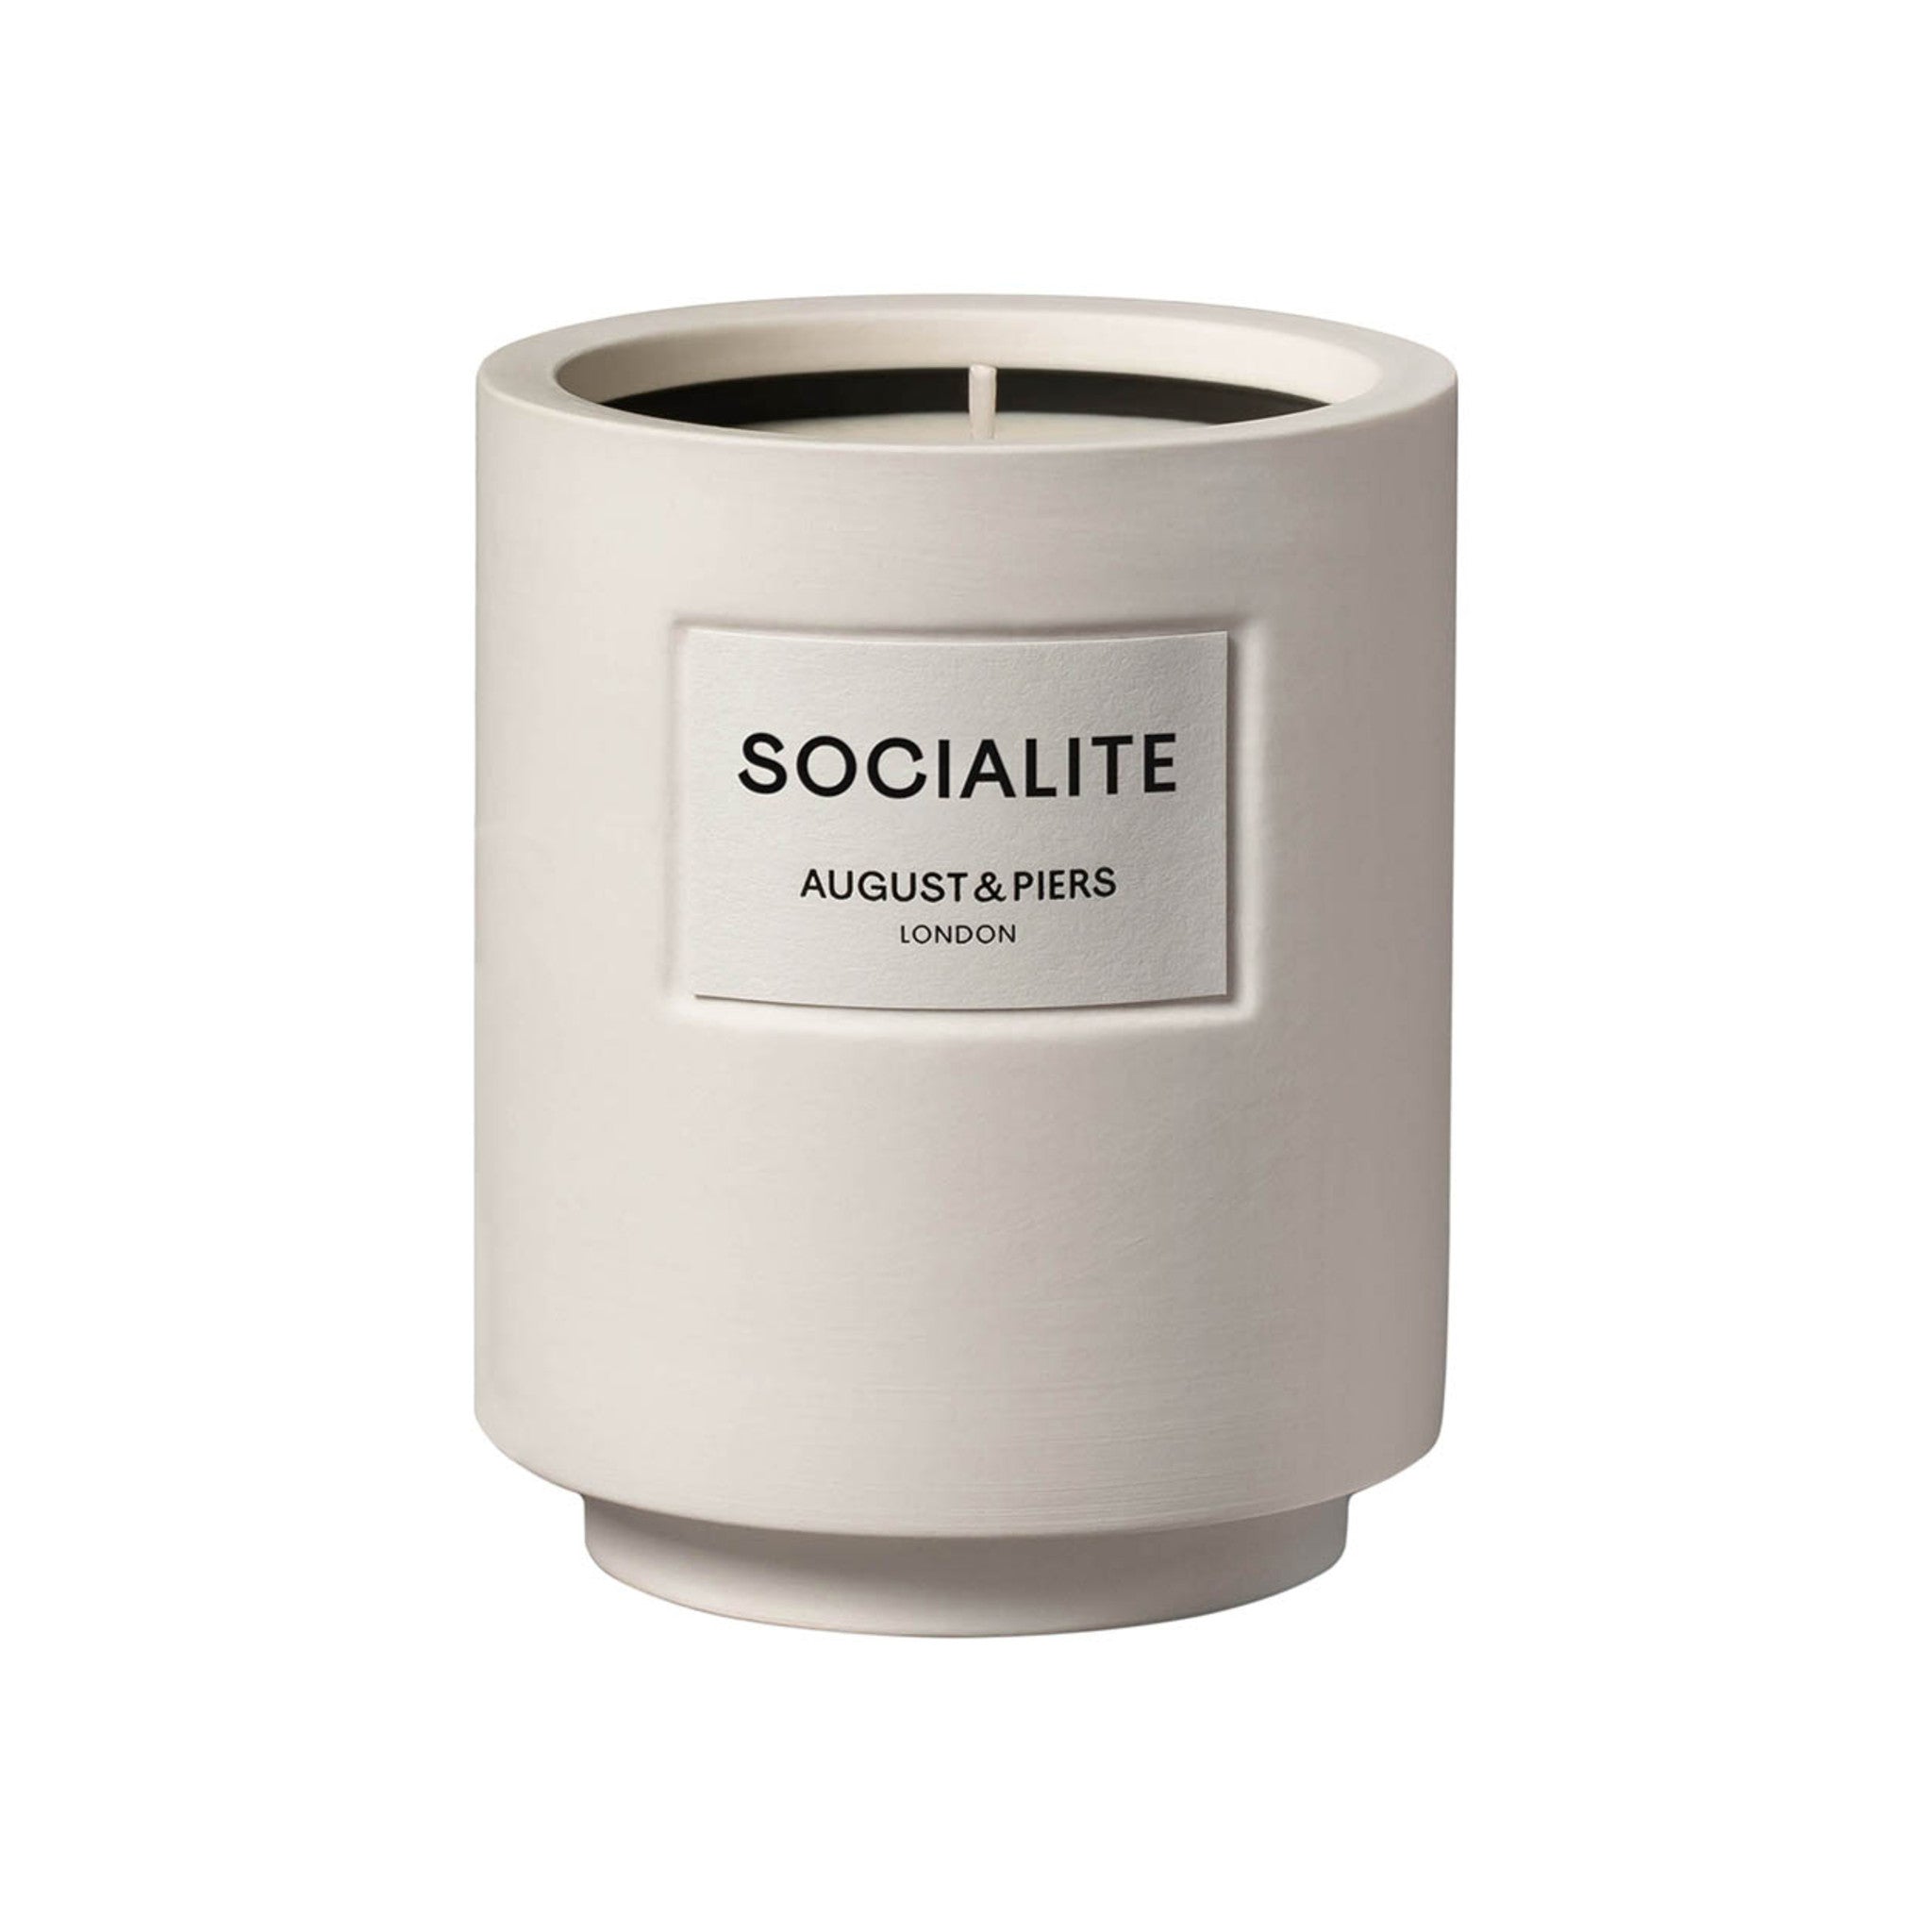 August & Piers Socialite Candle main image.